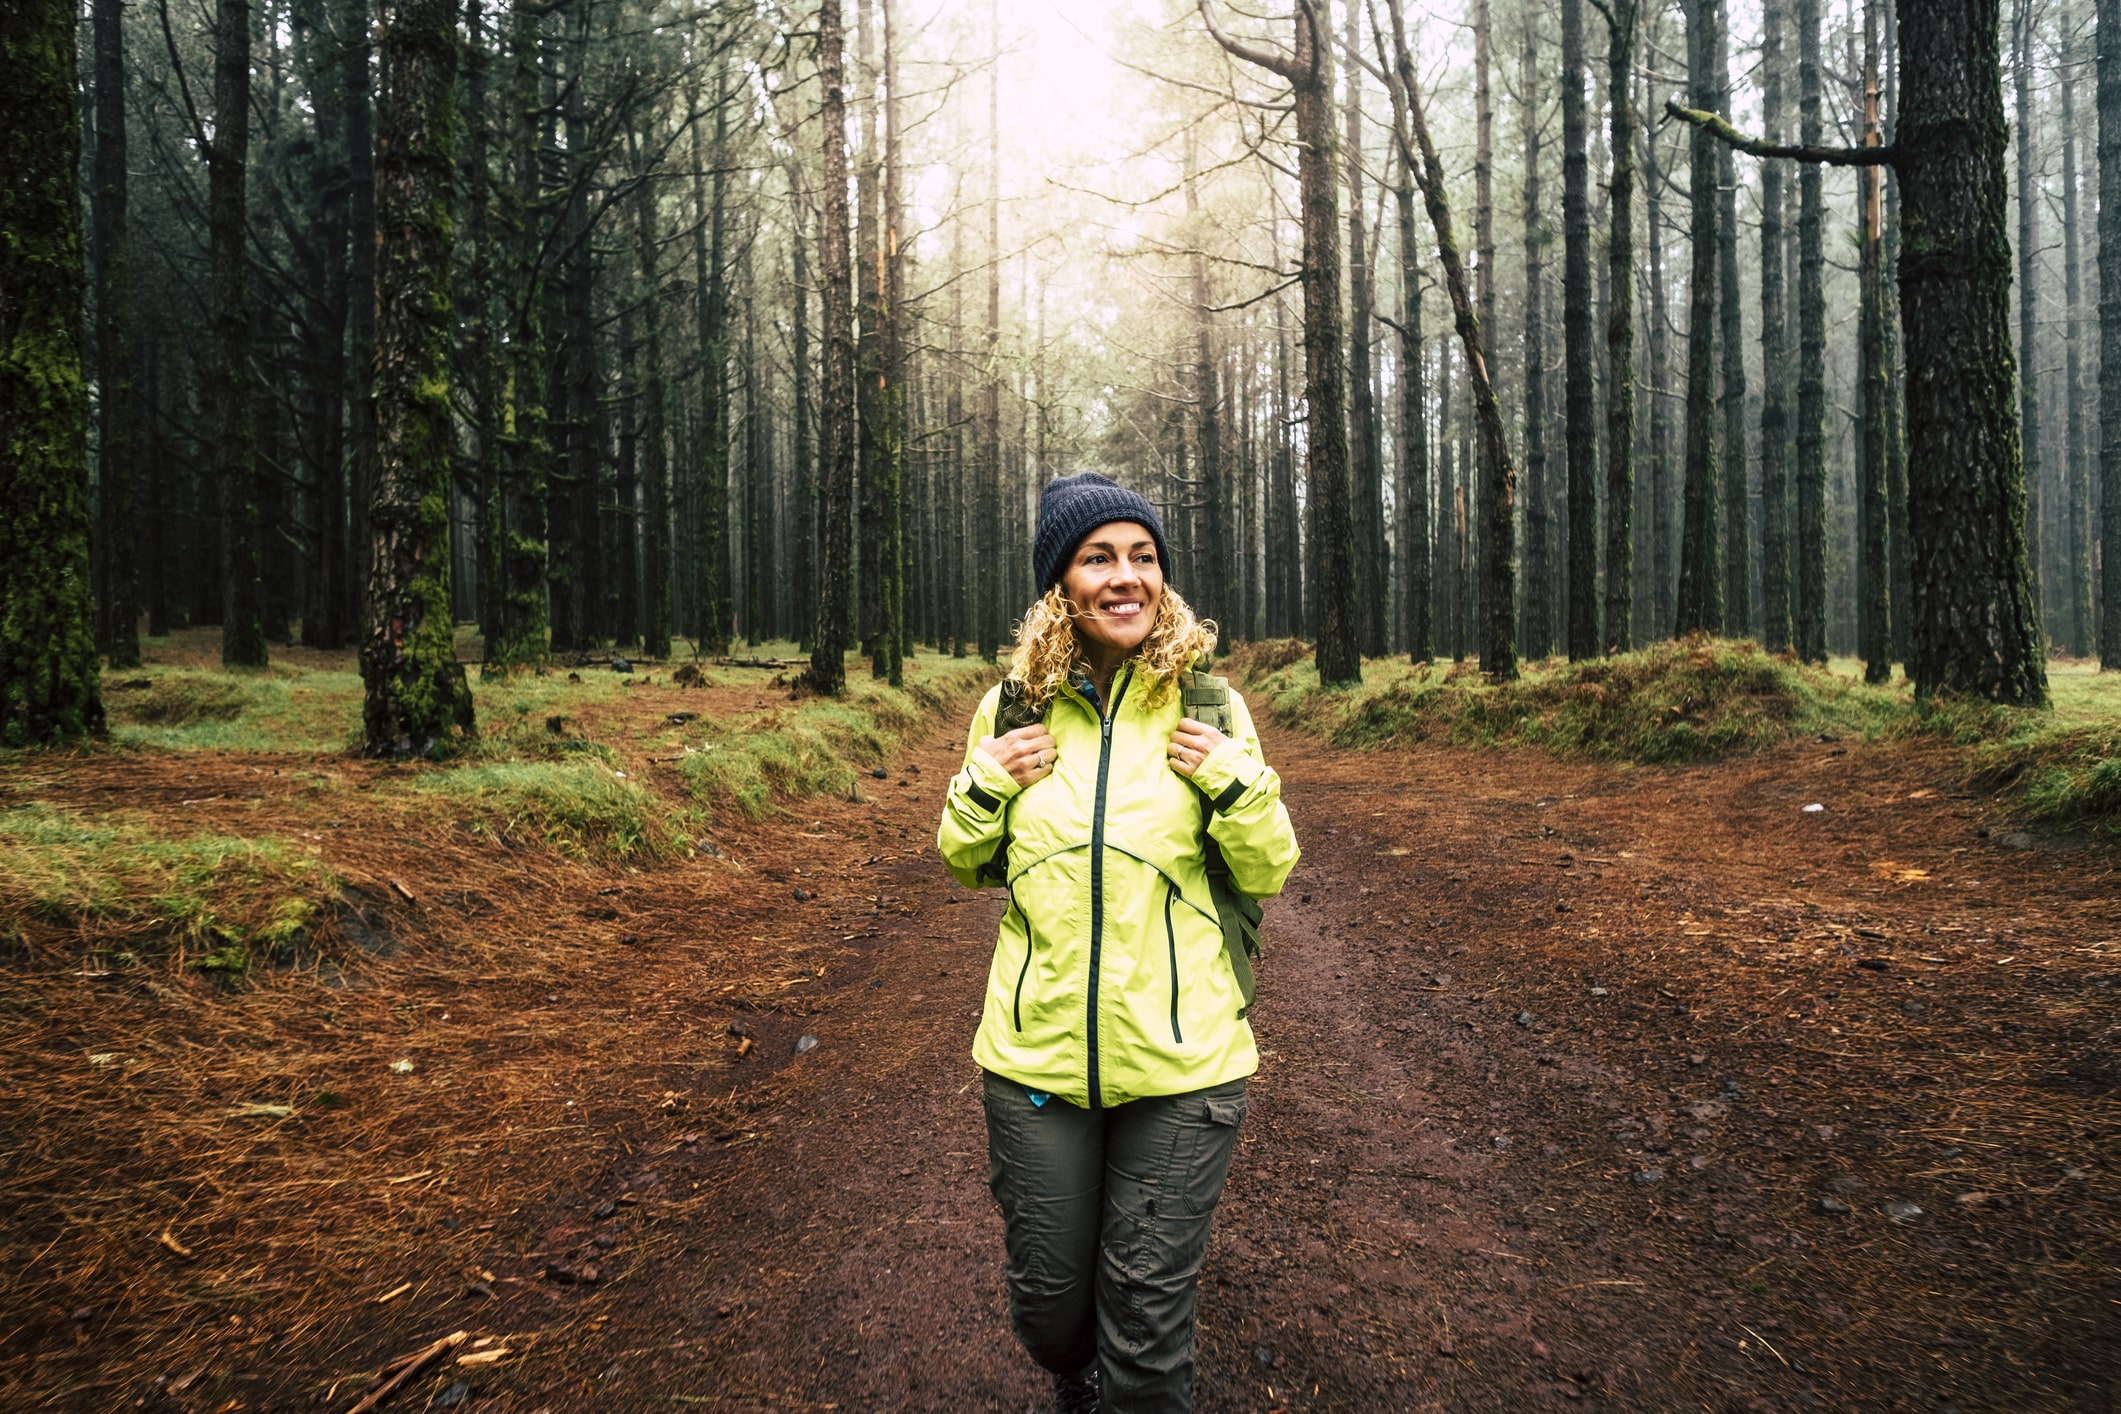 Happy female hiker smiling and enjoying nature while walking in a forest with high trees.